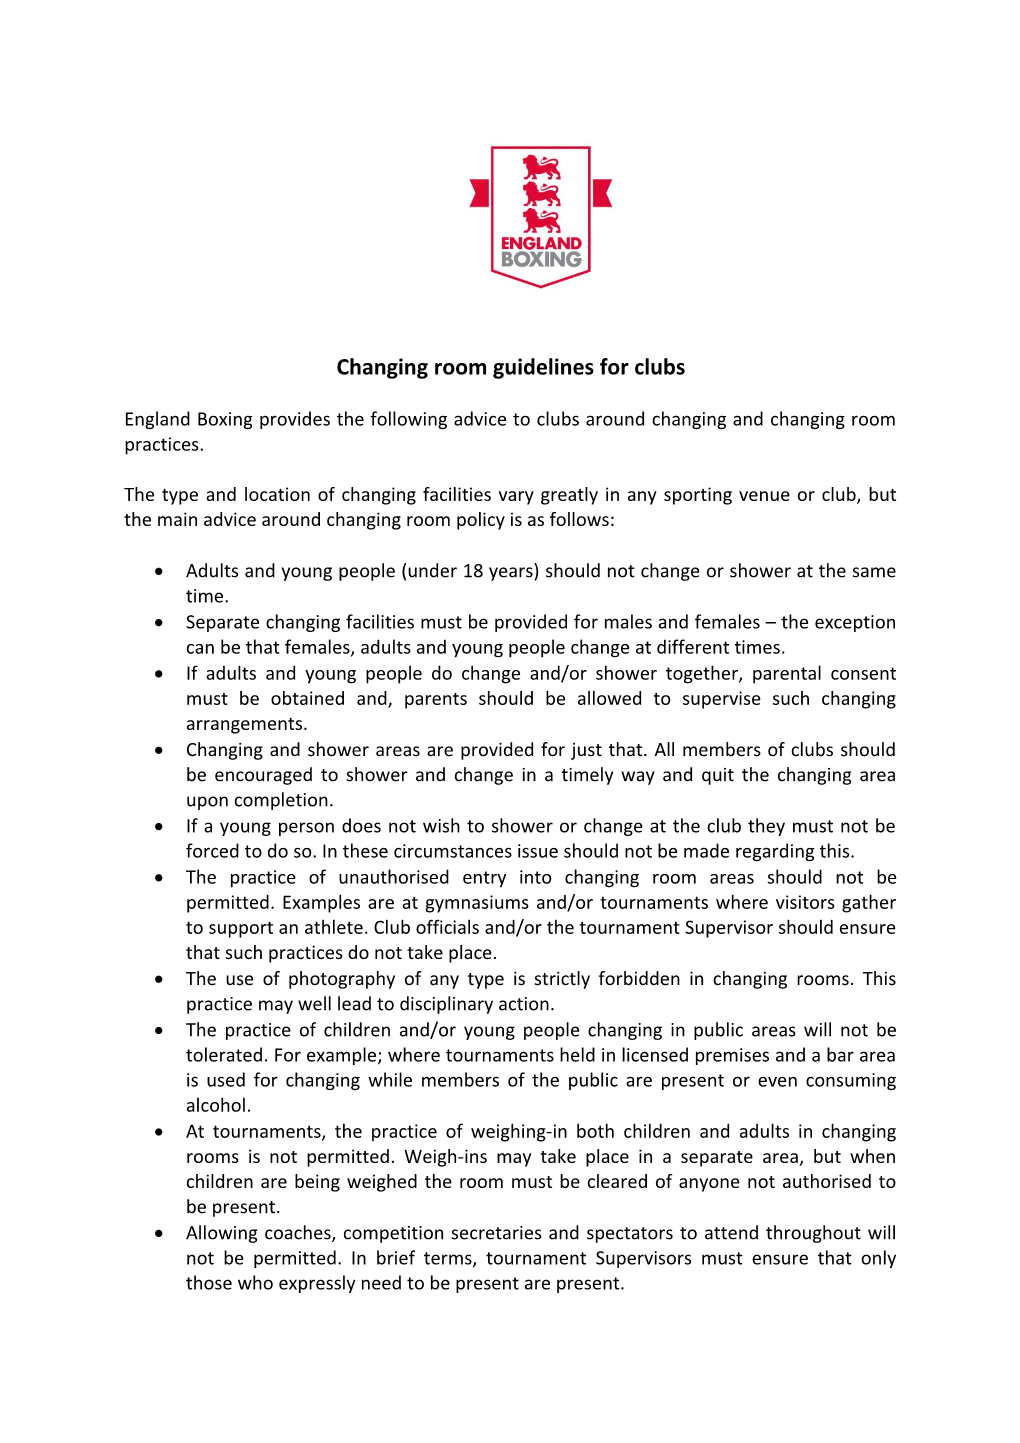 Changing Room Guidelines for Clubs